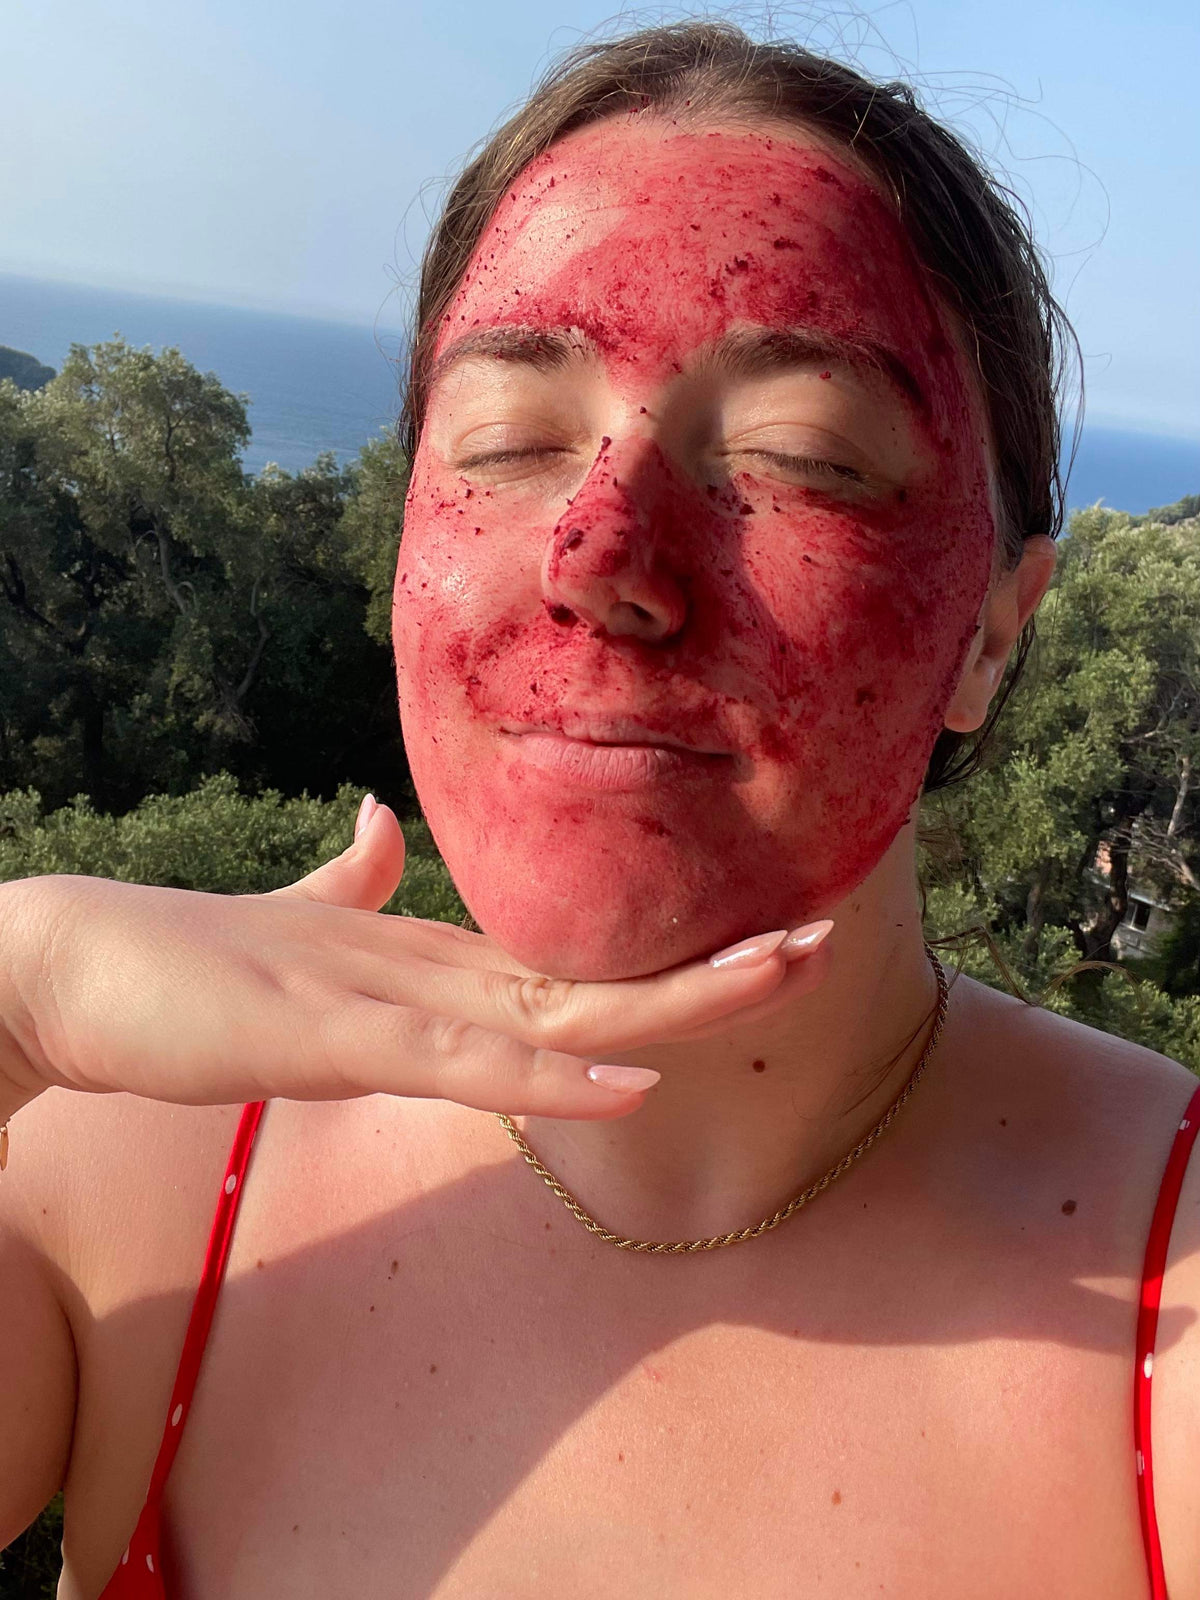 Hibiscus Face Mask